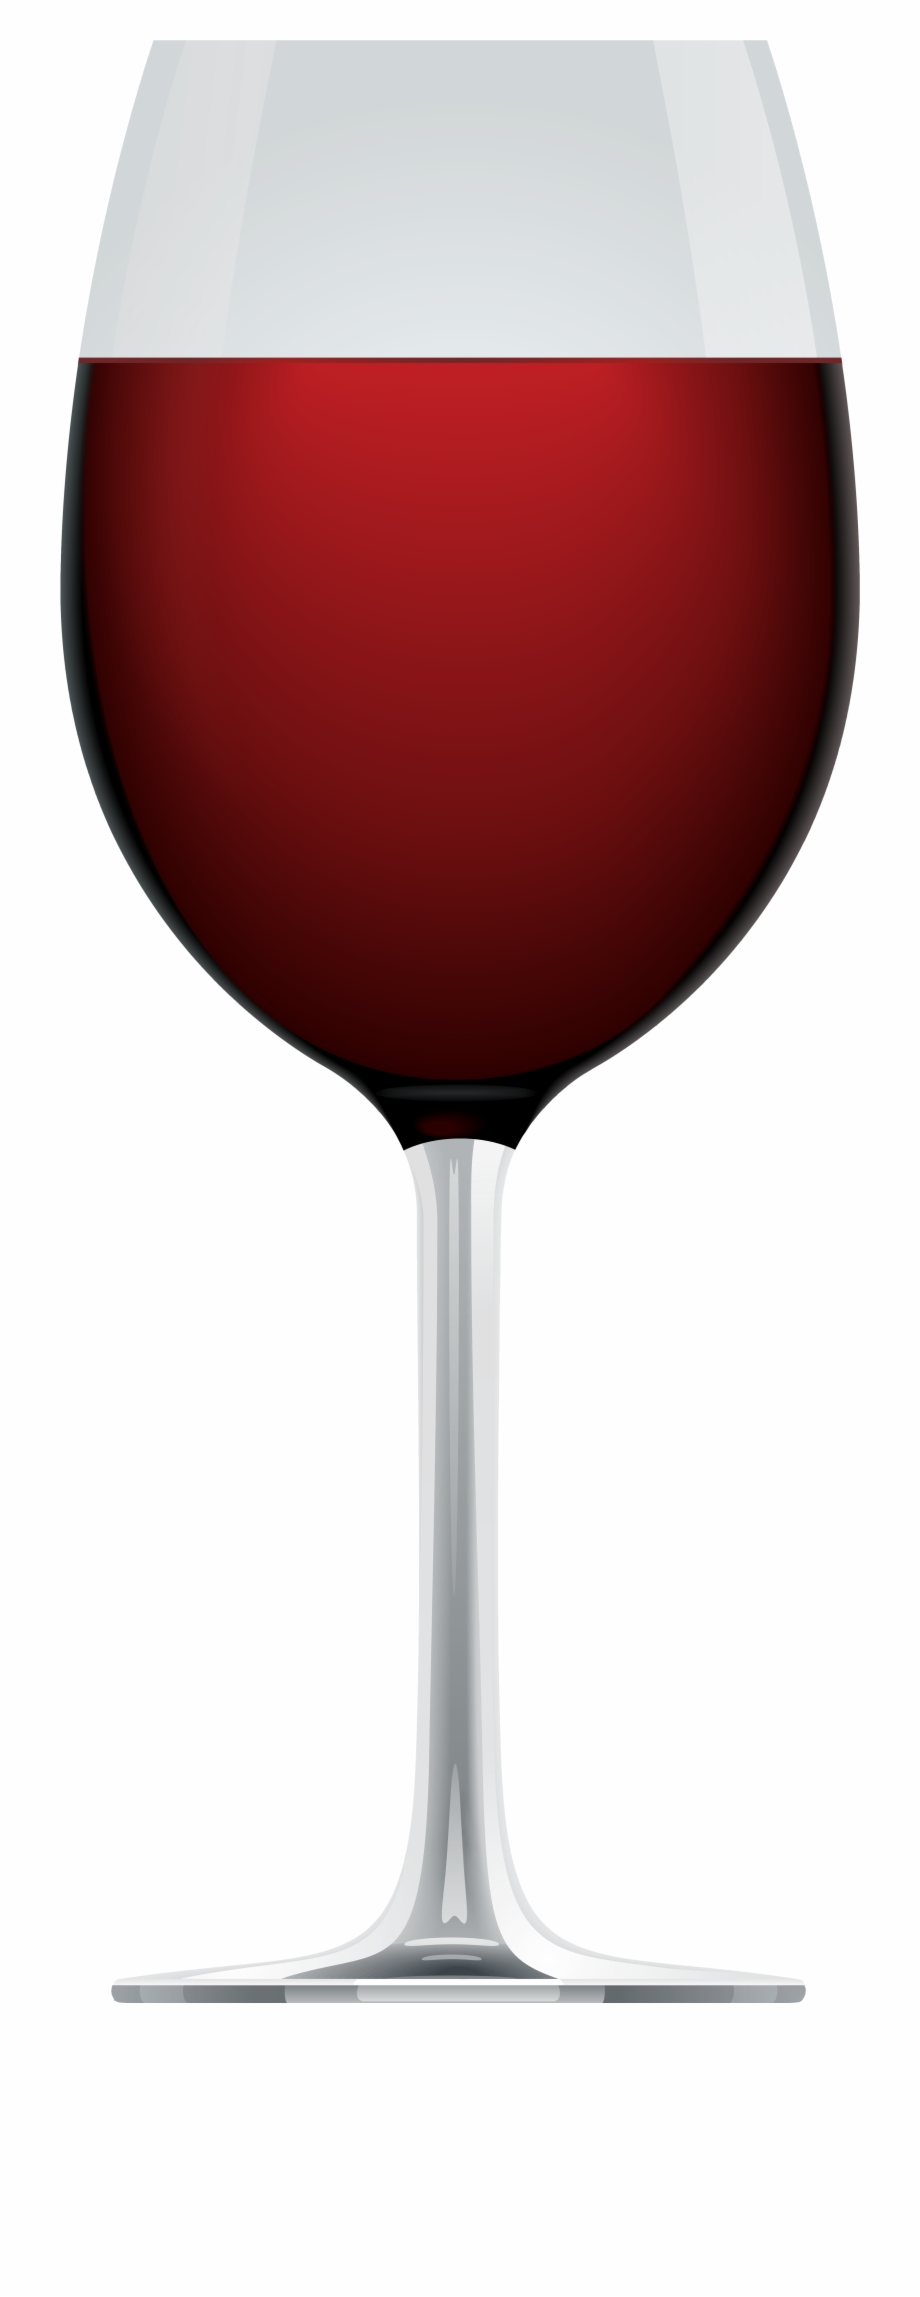 Wine Glass Cartoon Transparent Background / The clip art image is